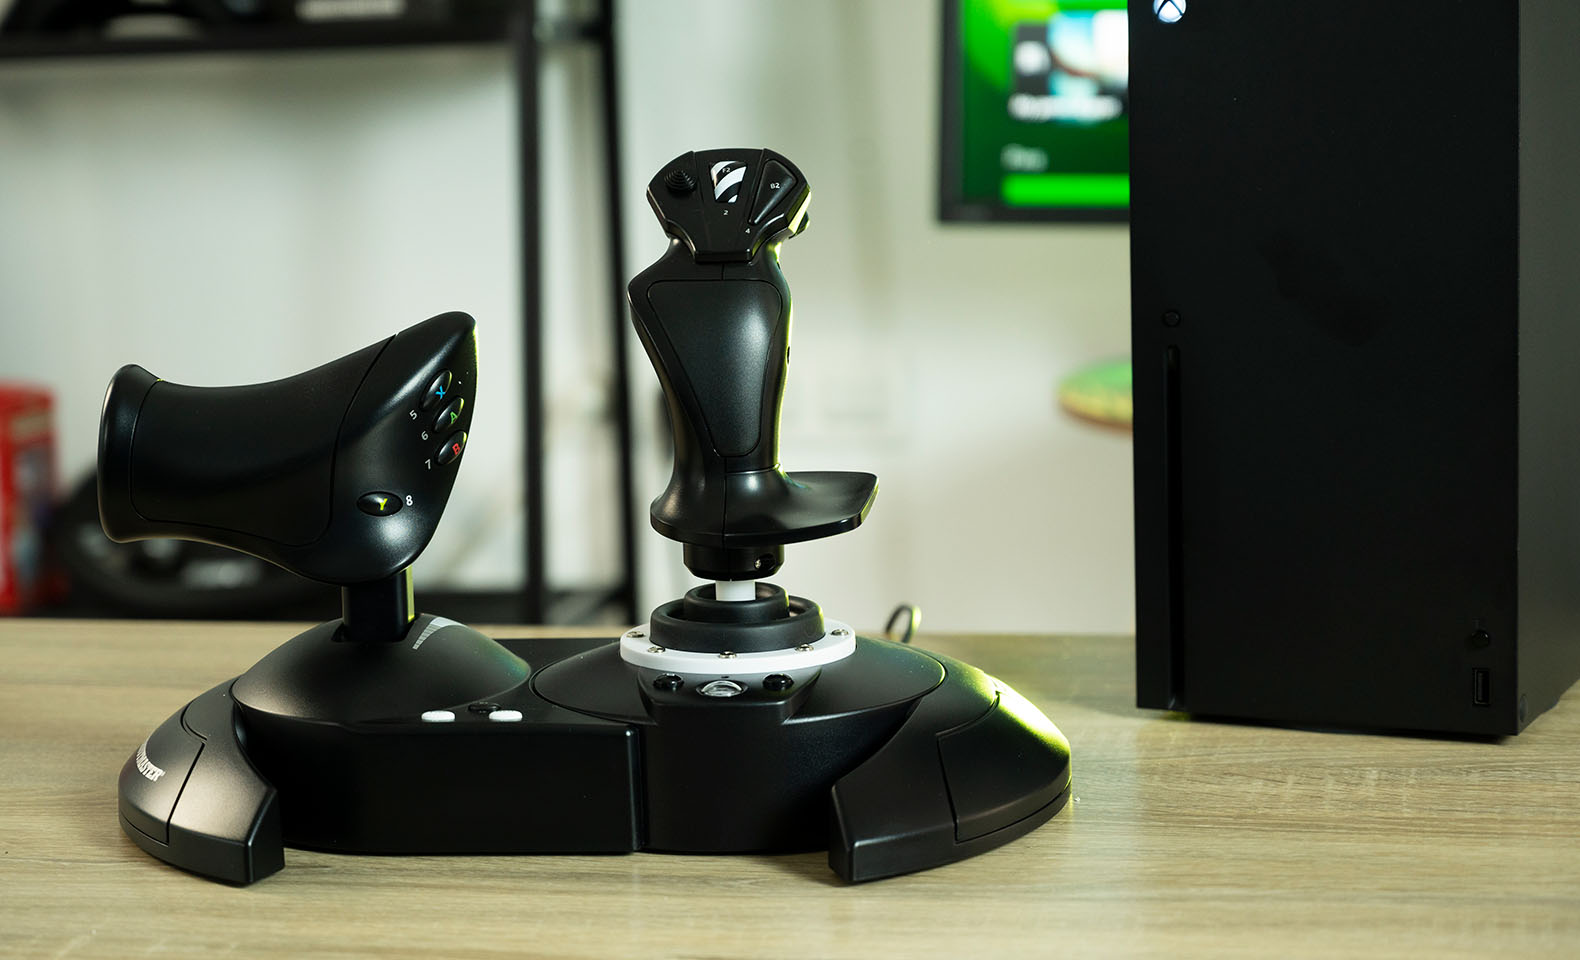 How To Use A Flight Stick On Xbox One